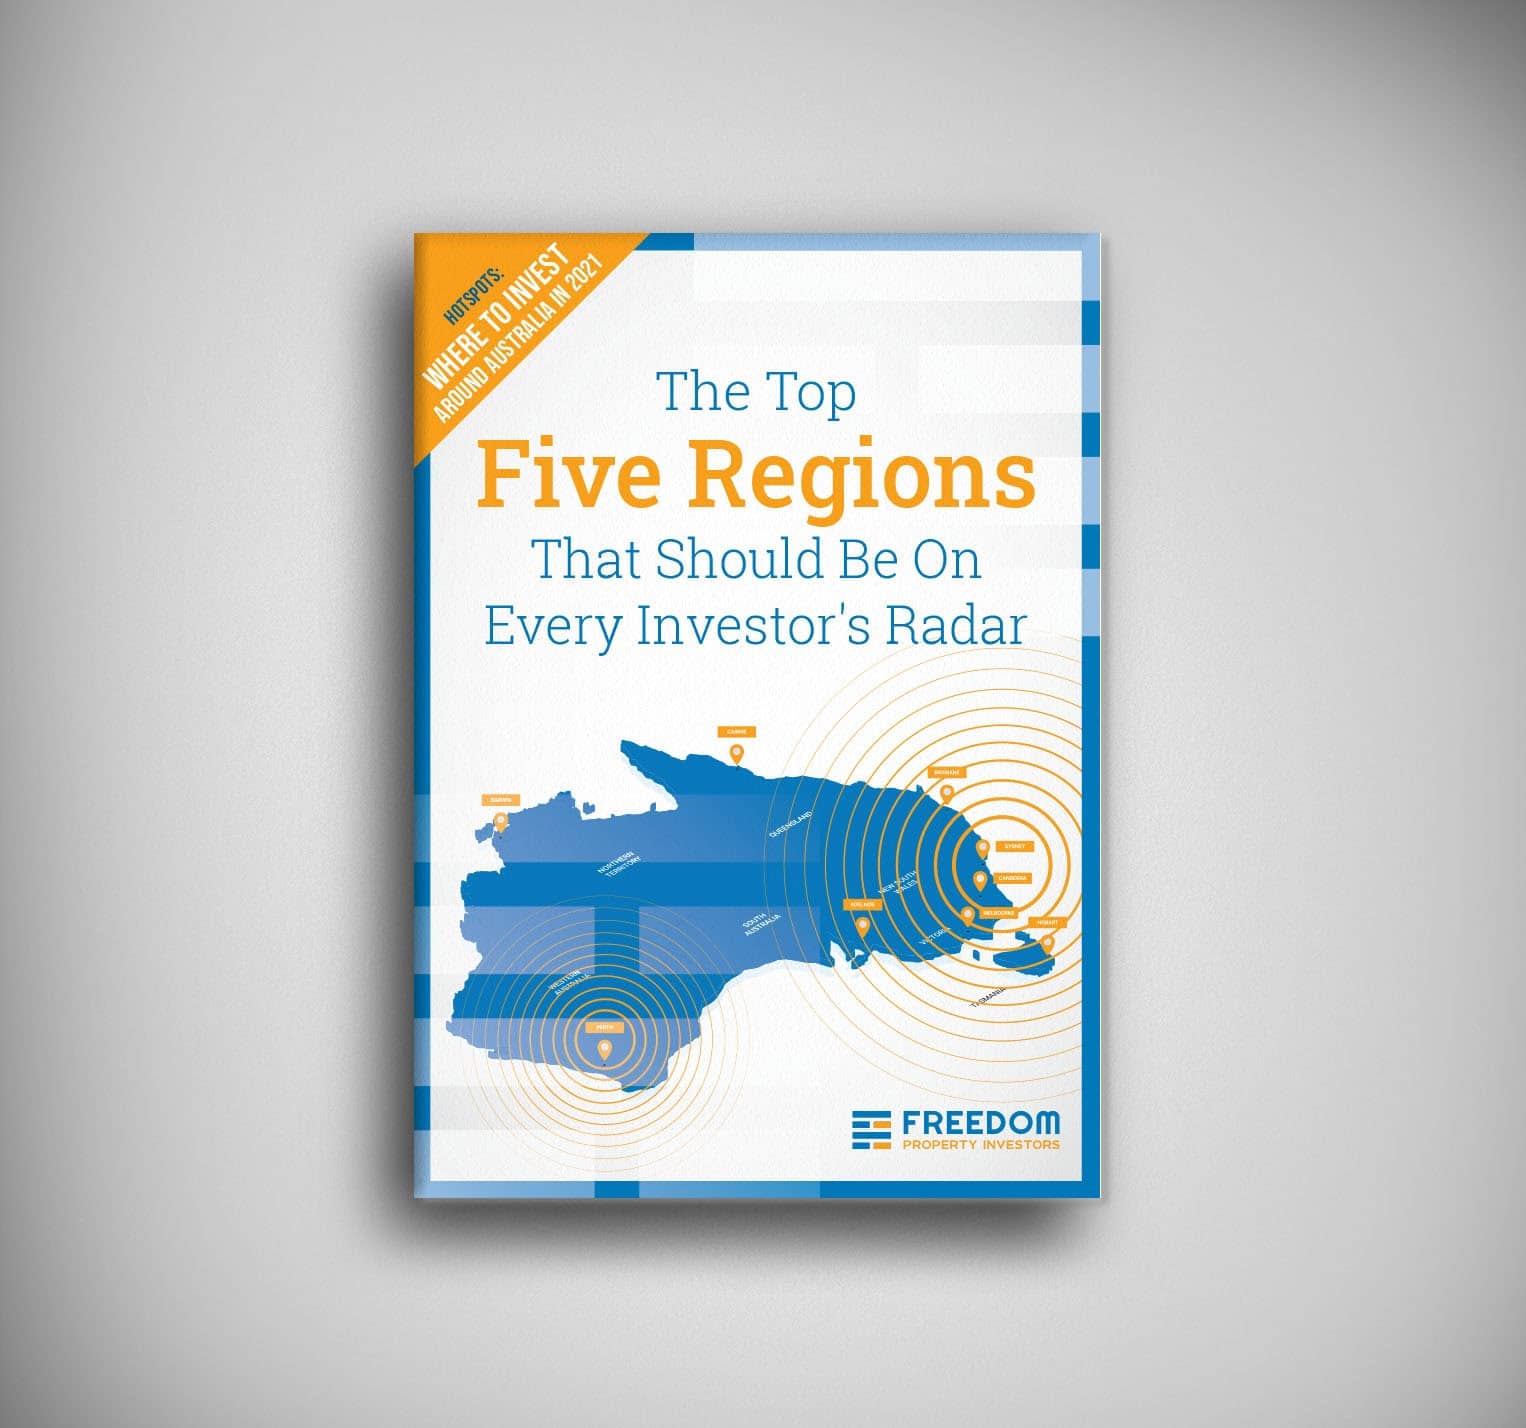 The Top Five Regions That Should Be On Every Investor’s Radar